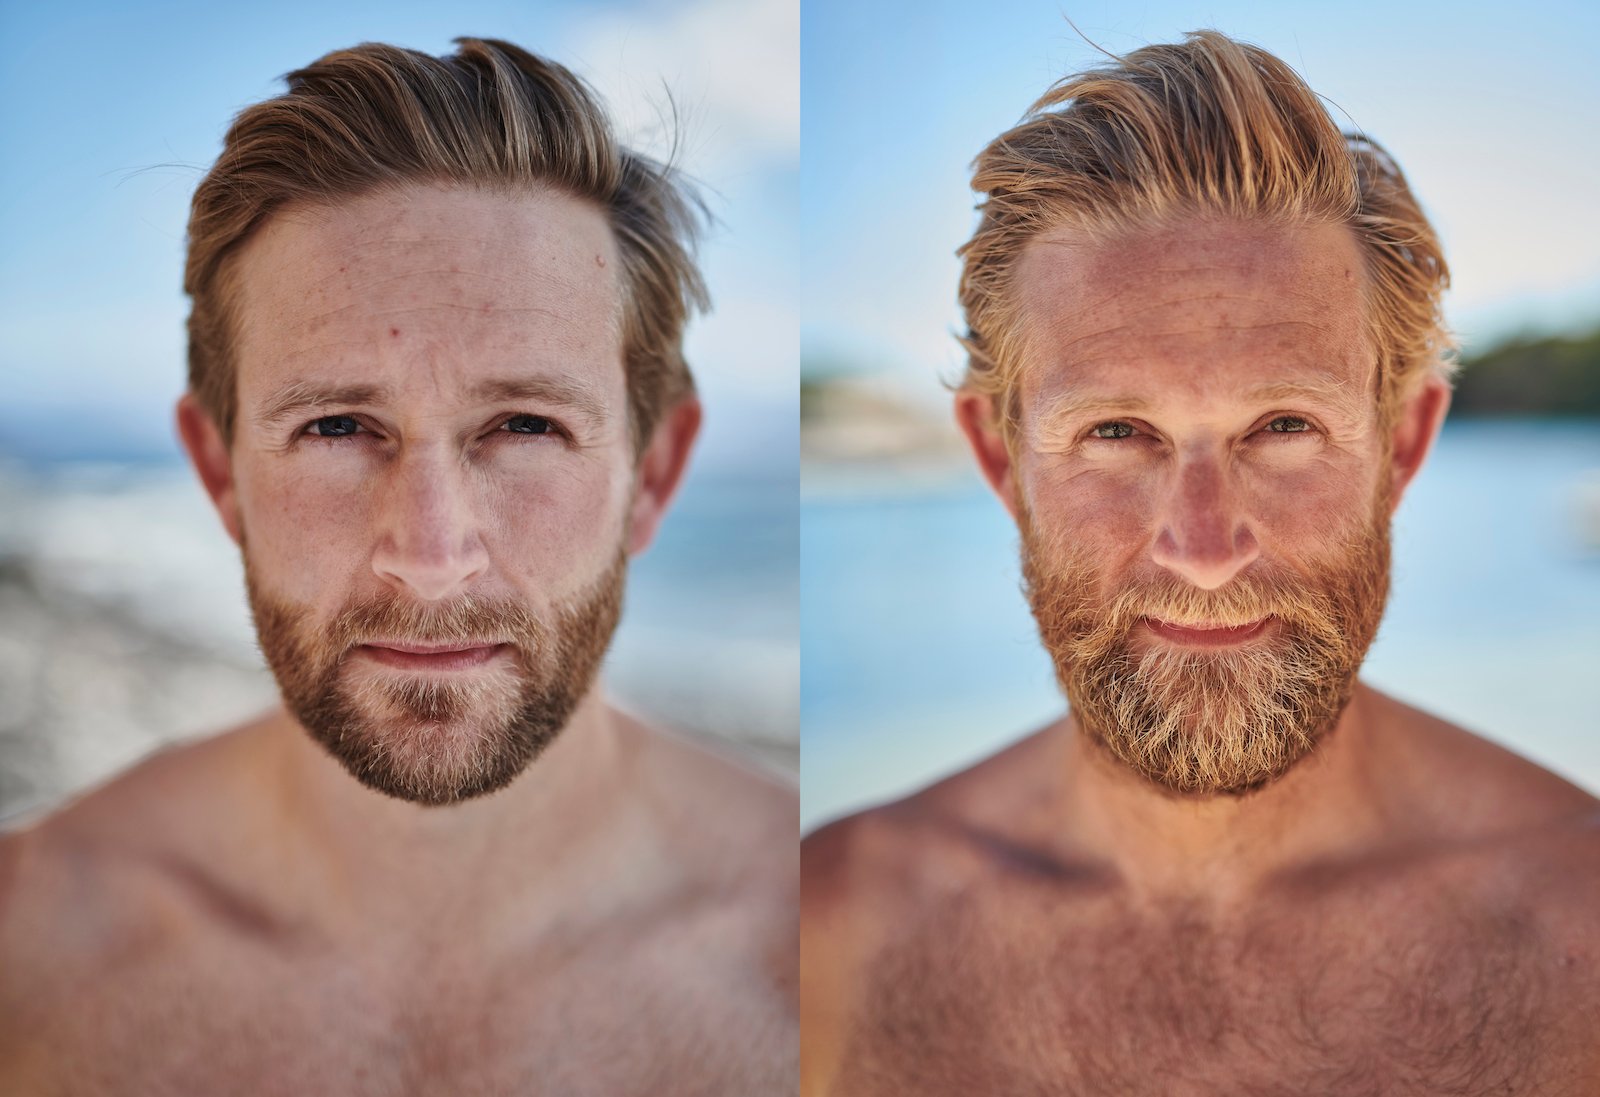 Jimmy Carroll with a beard before and after rowing the Atlantic